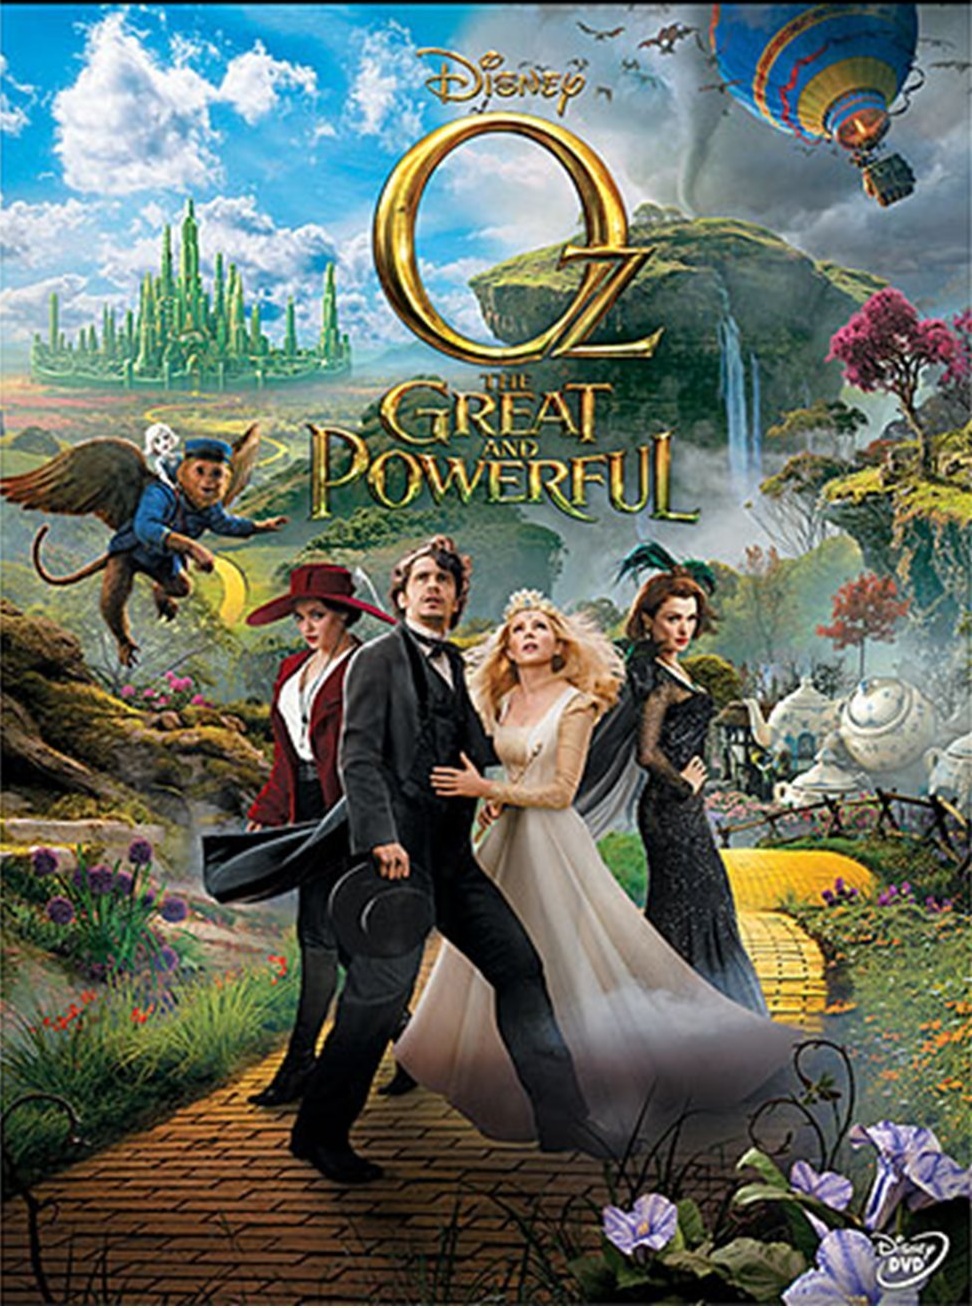 Oz: The Great and Powerful